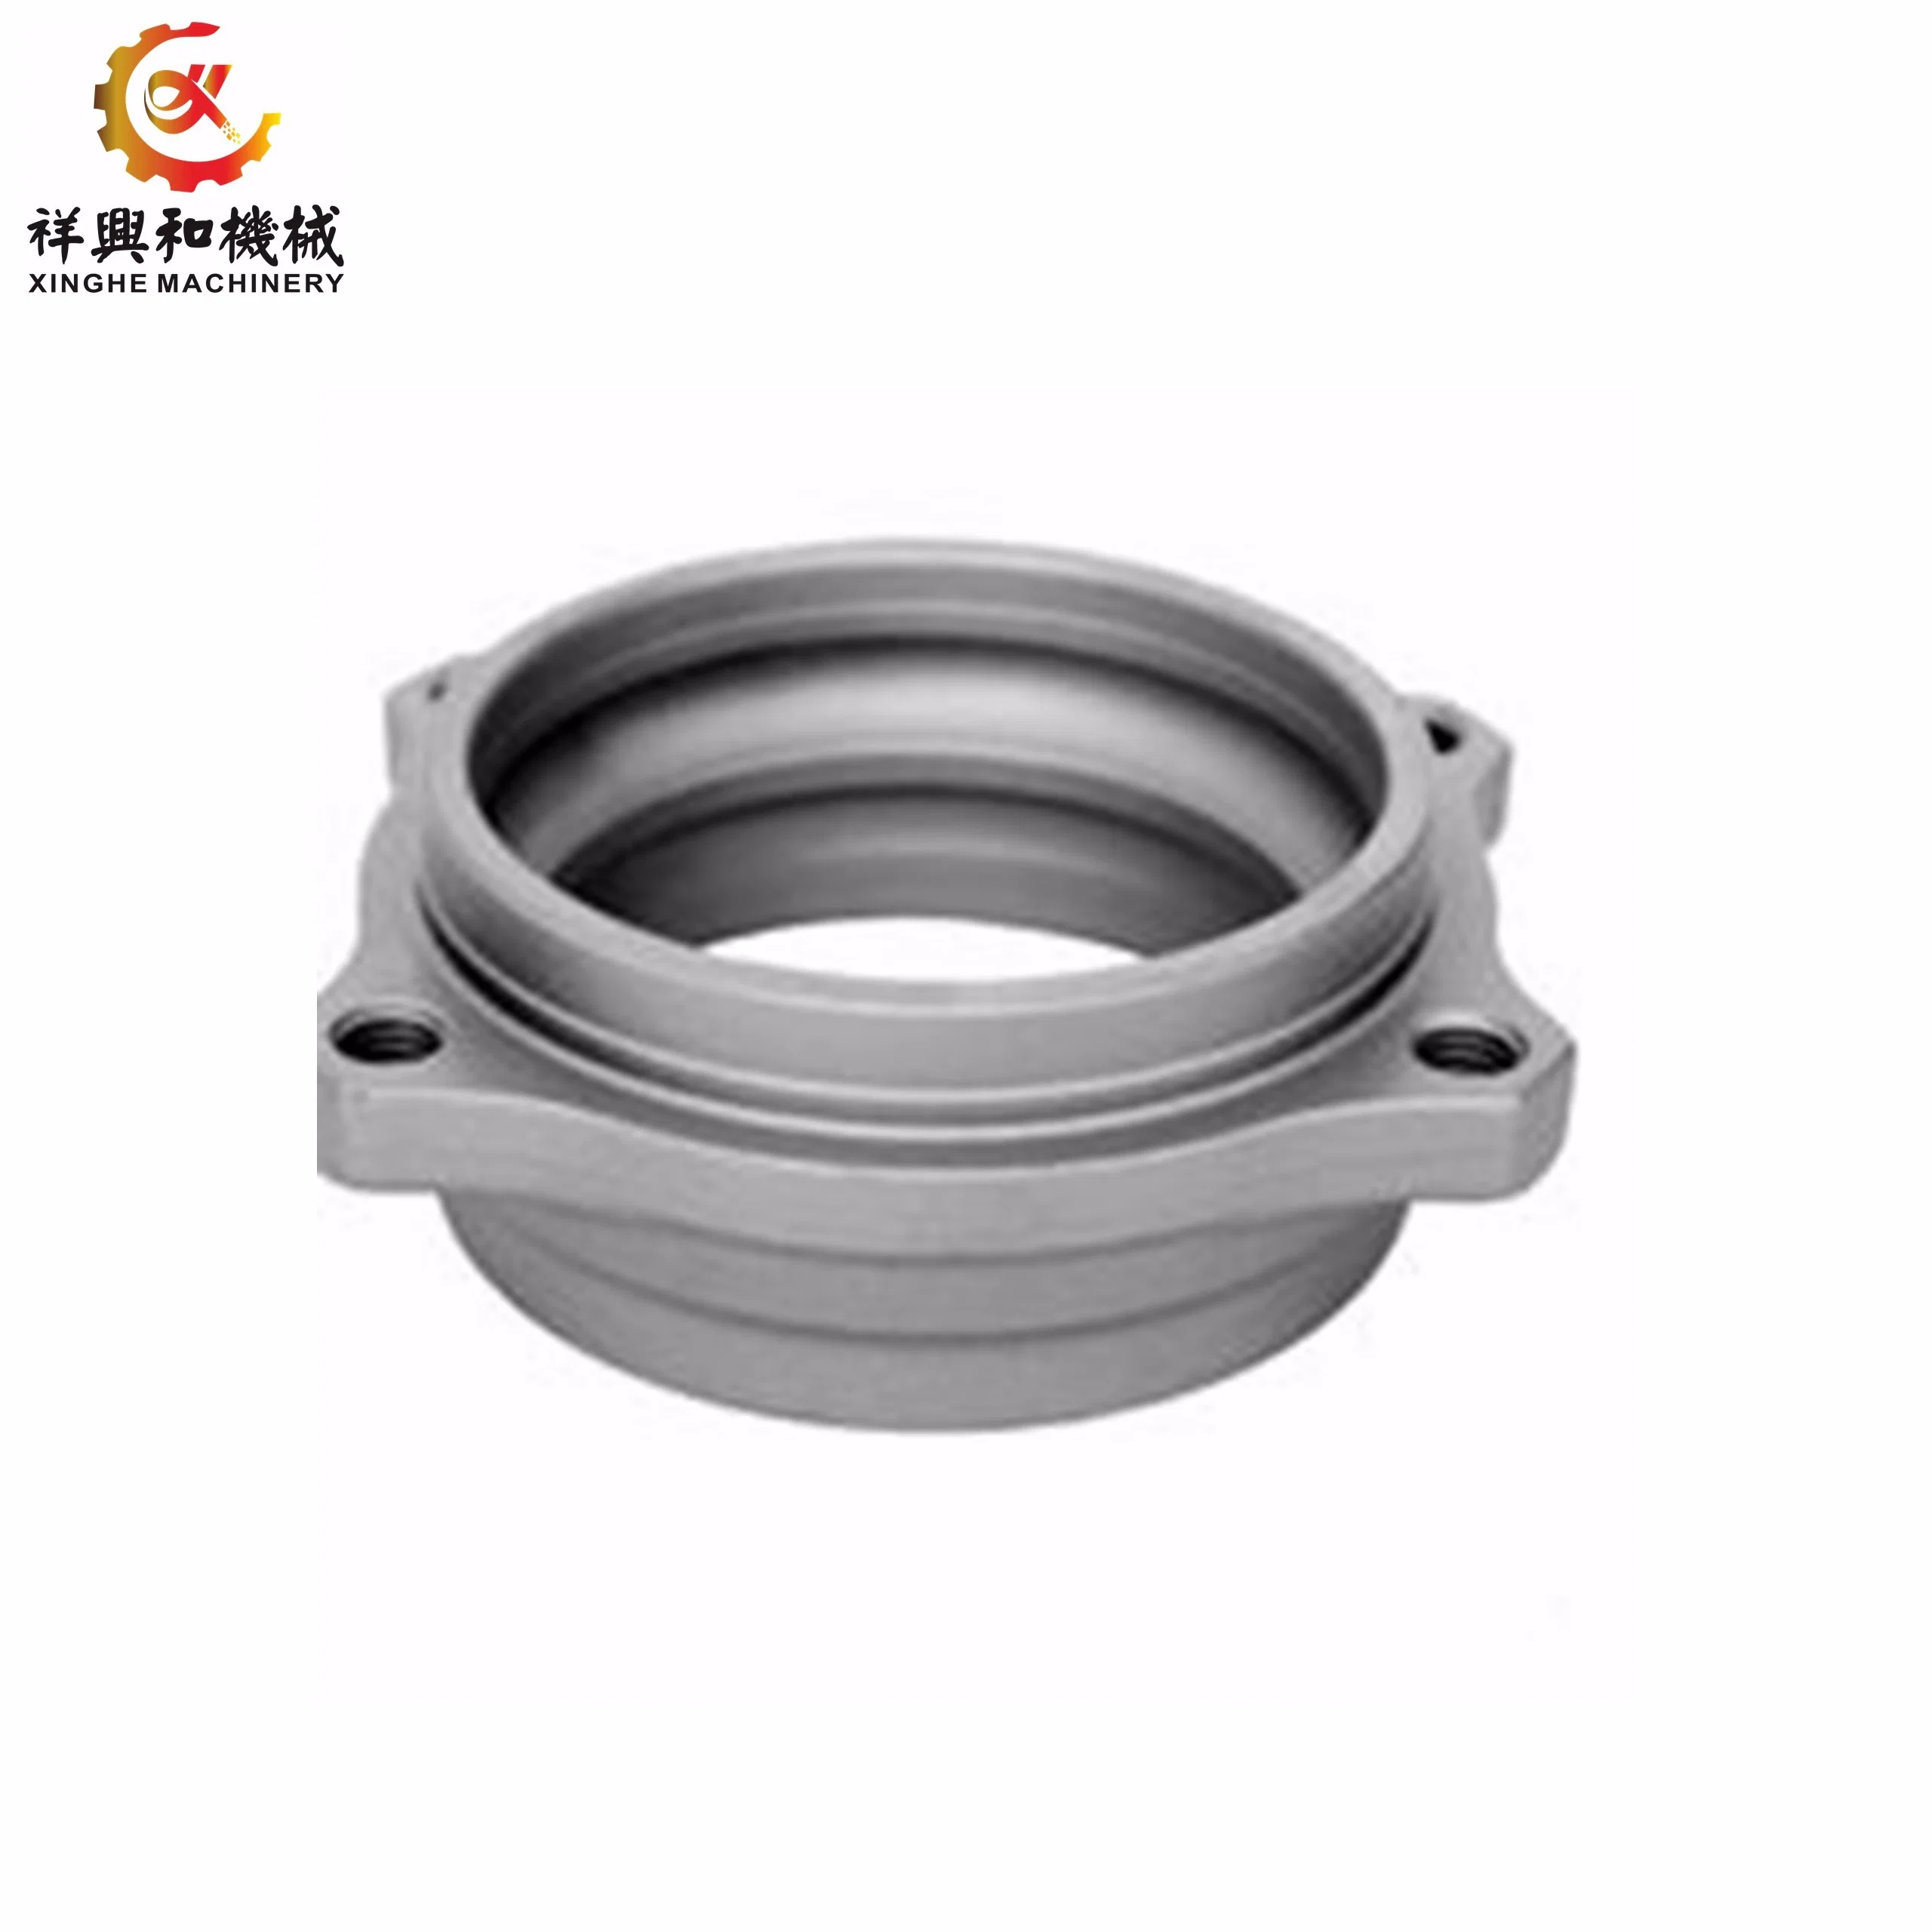 Alloy Die Forging Aluminum Product Cold Steel Forging for Truck Spare Parts